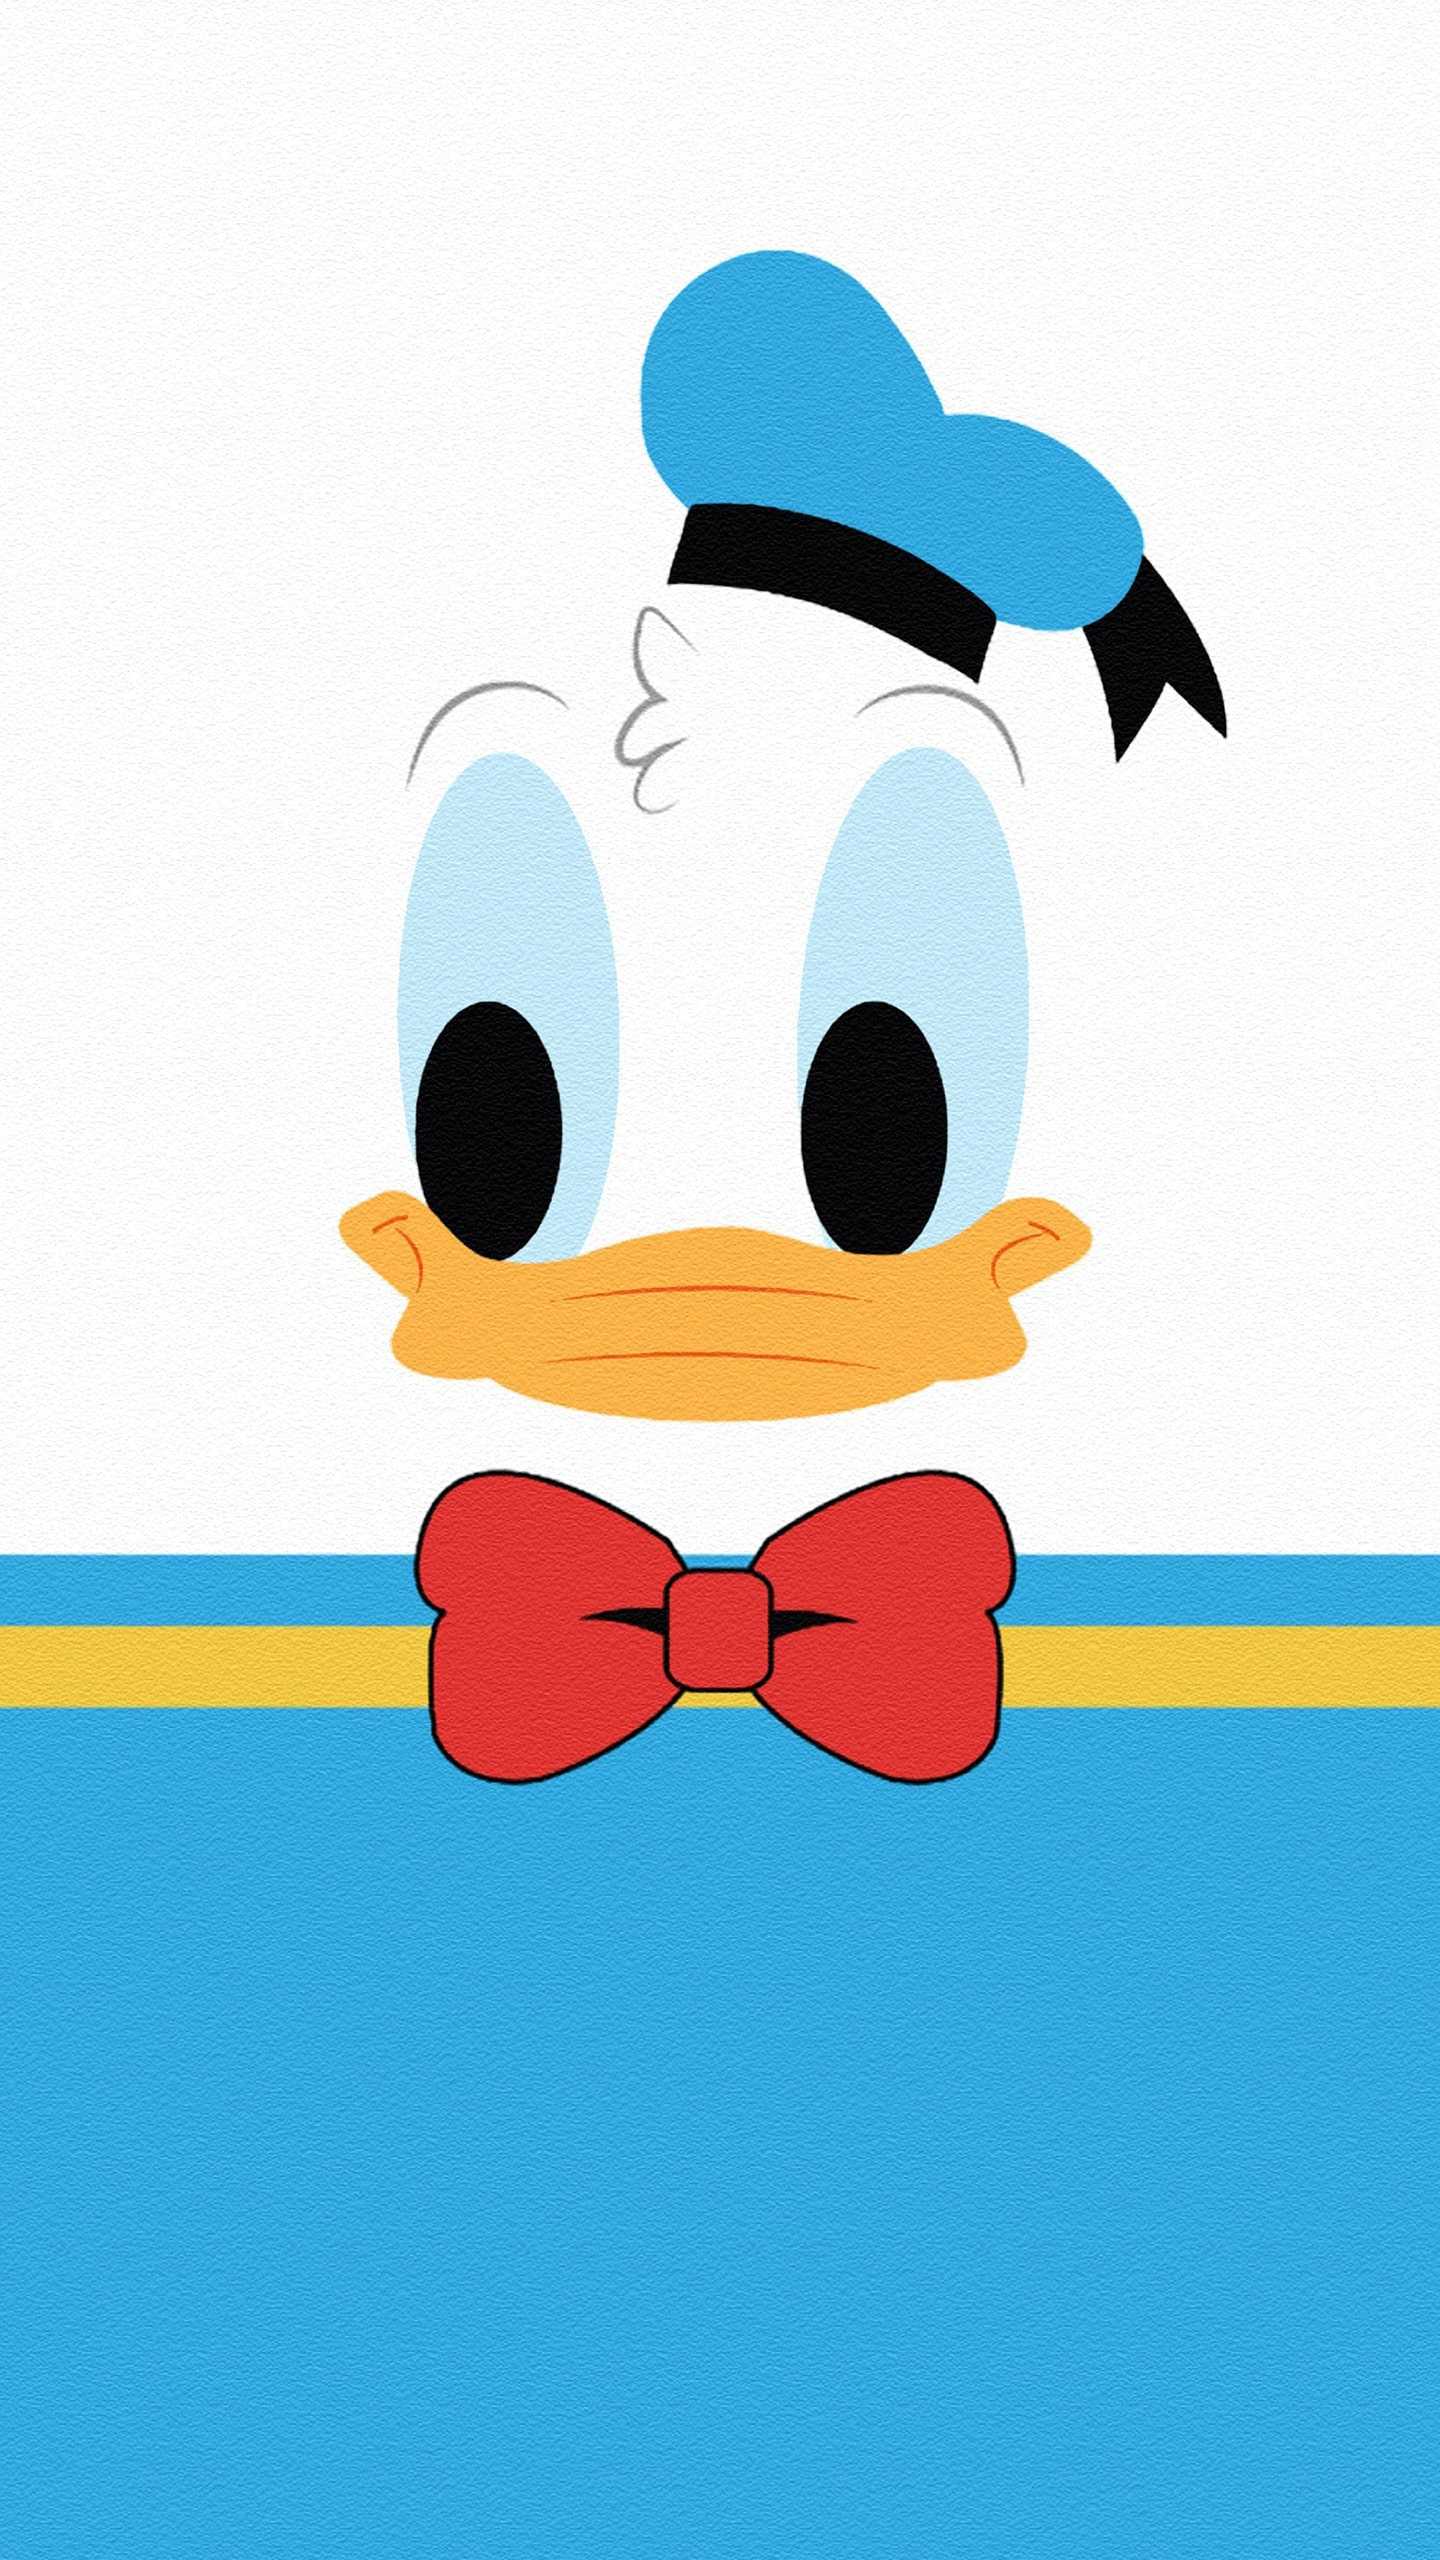 A cartoon duck with blue hat and bow tie - Duck